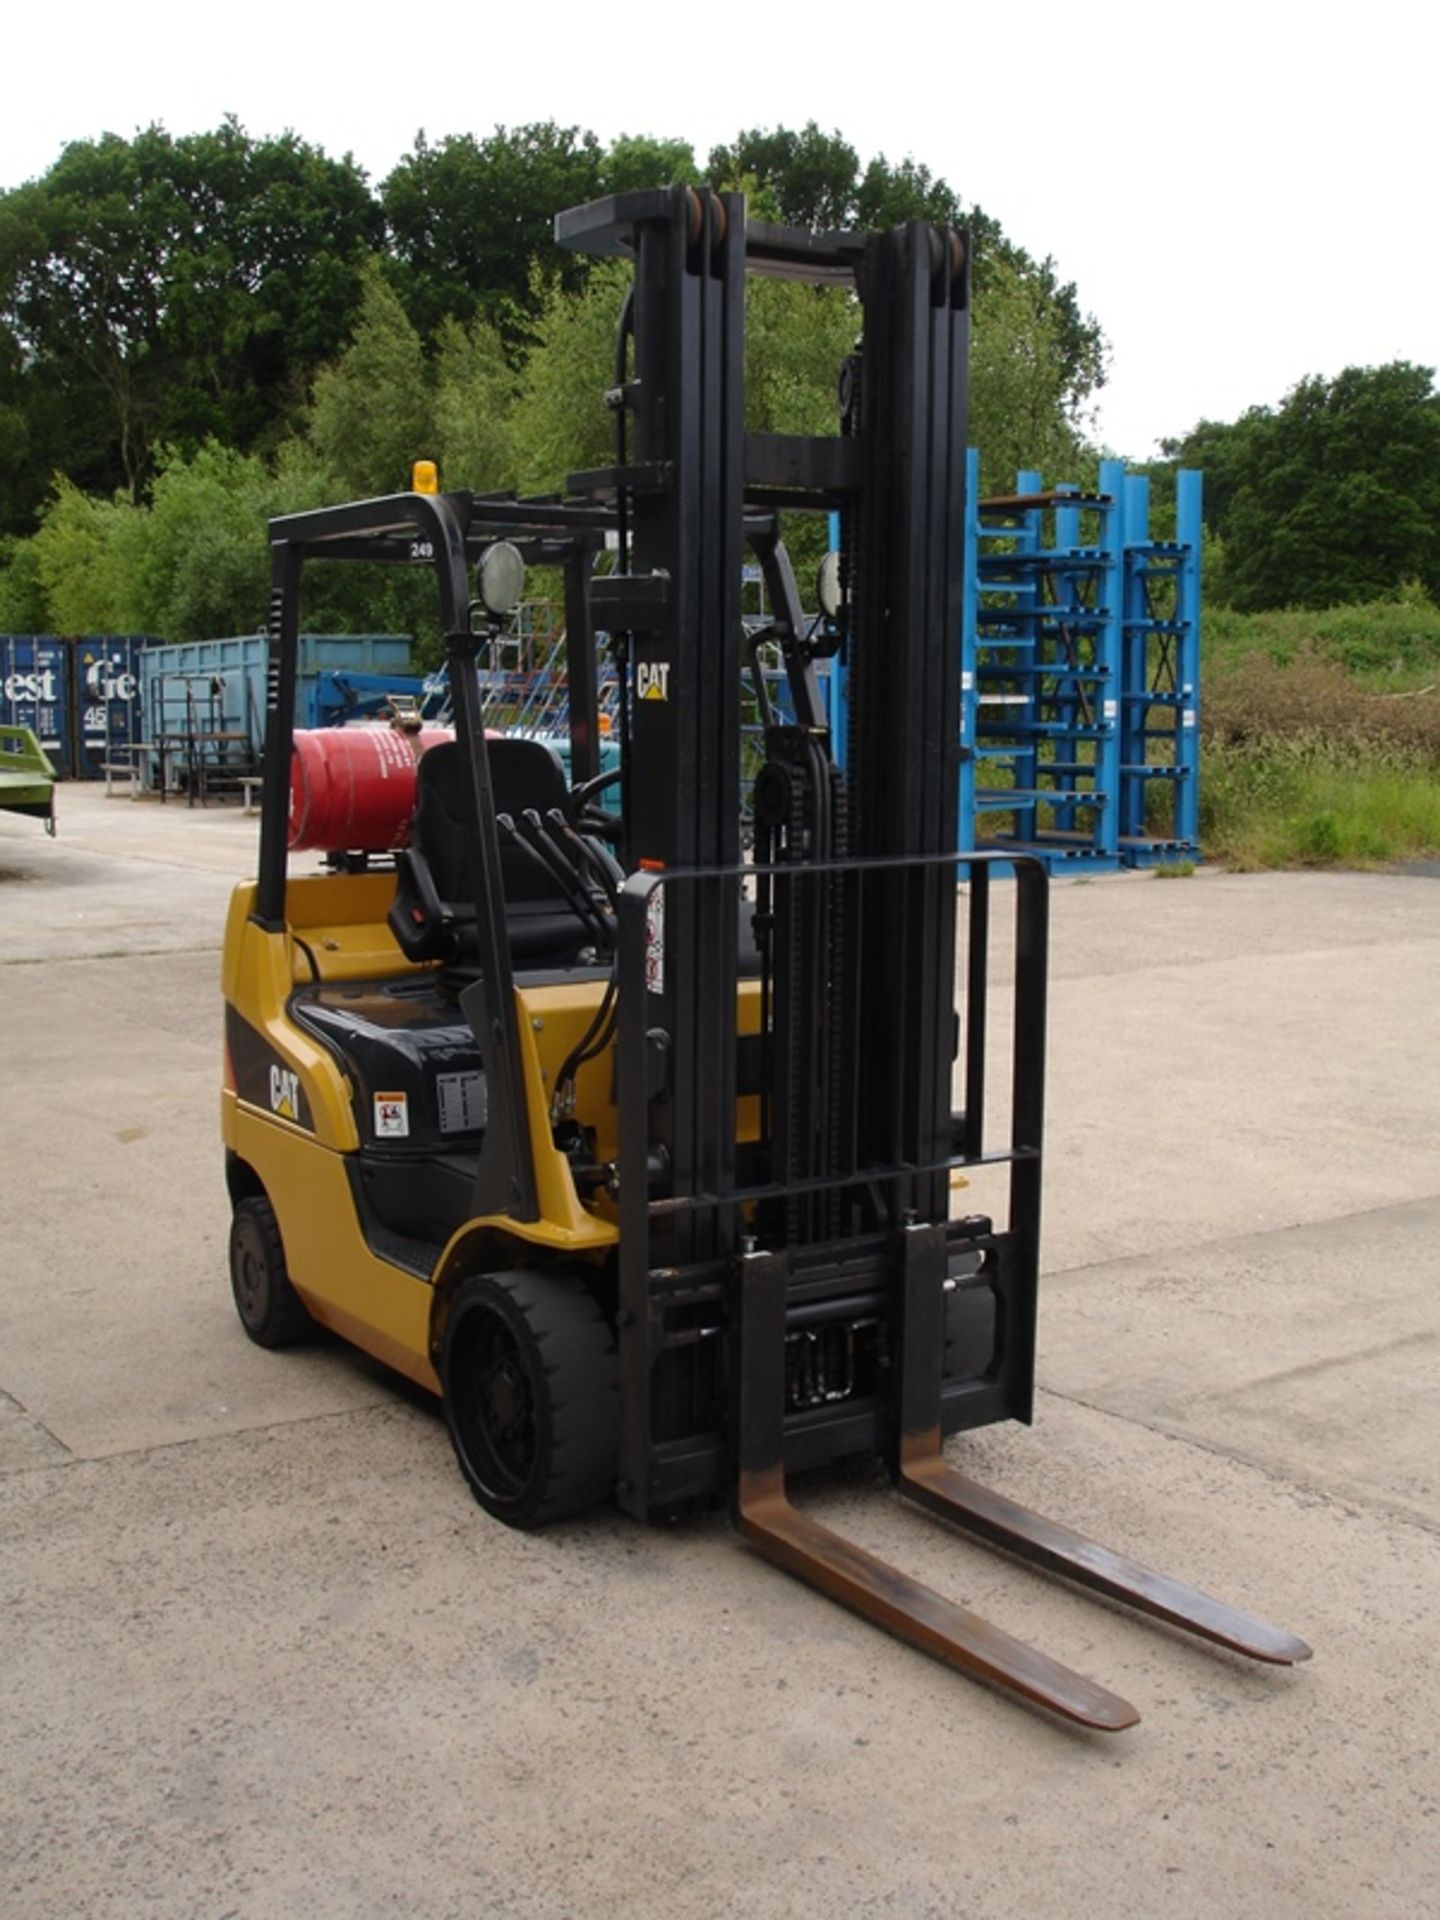 Caterpillar 2 Ton Compact Forklift (2014) - Image 4 of 8